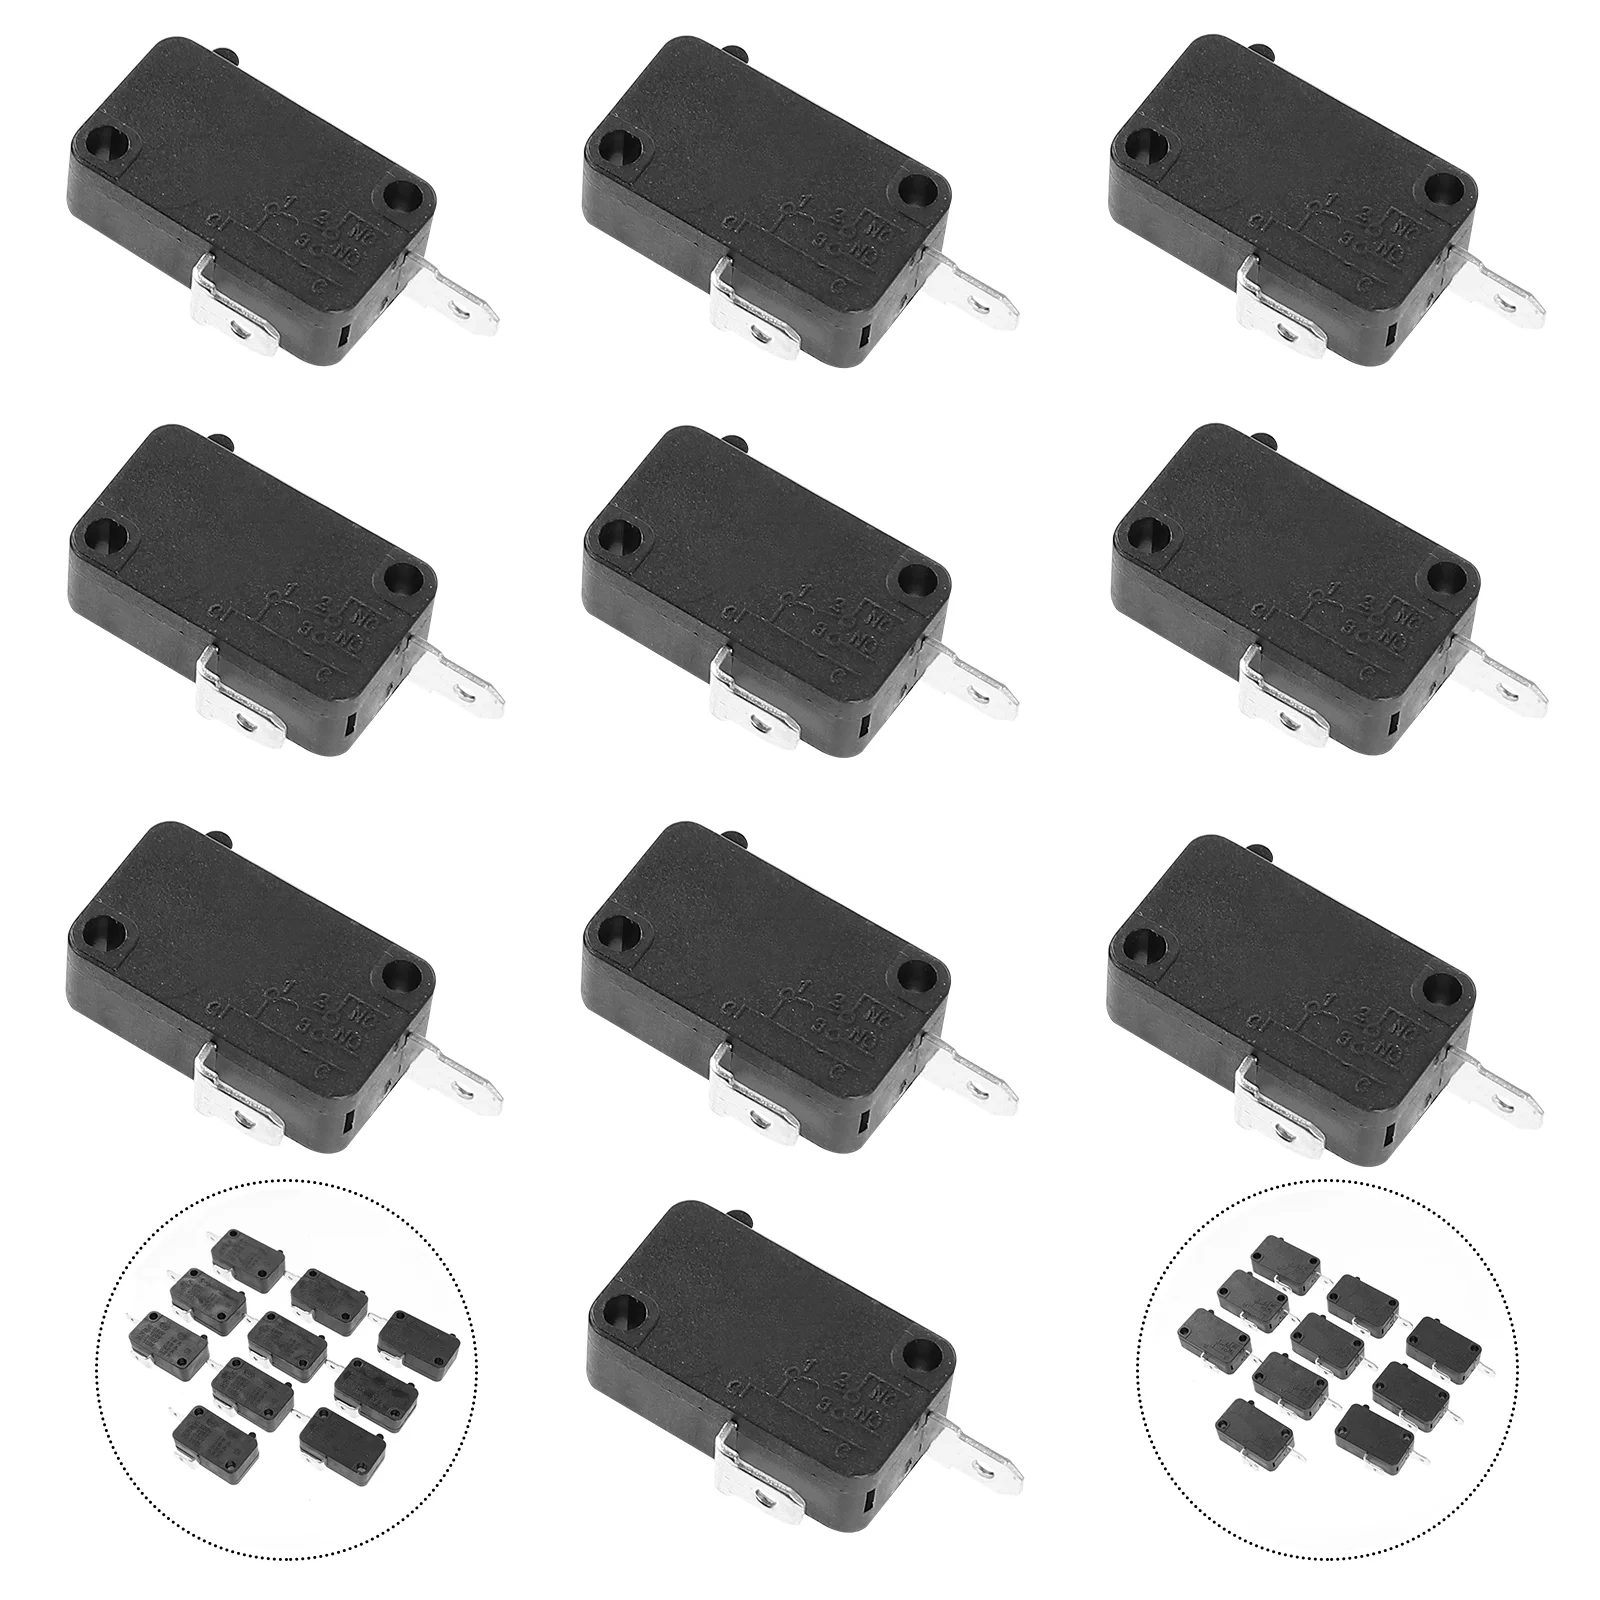 

10 Pcs Snap Buttons Micro Limit Switch Rice Cooker Microwave 16a Switches 3d Normally Open SPDT Action Oven